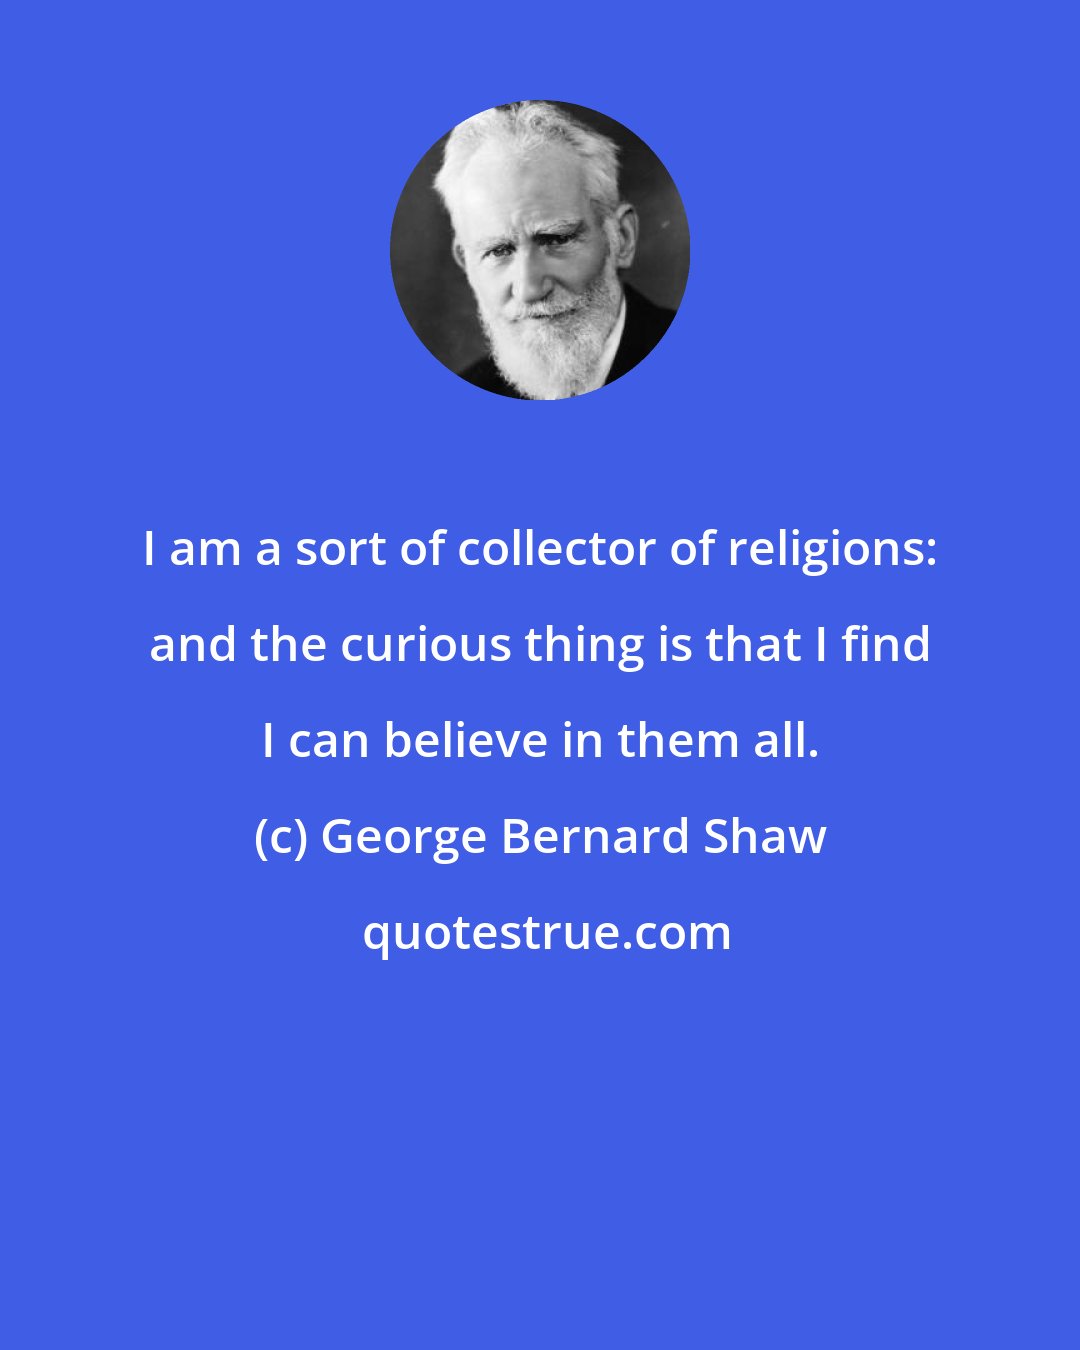 George Bernard Shaw: I am a sort of collector of religions: and the curious thing is that I find I can believe in them all.